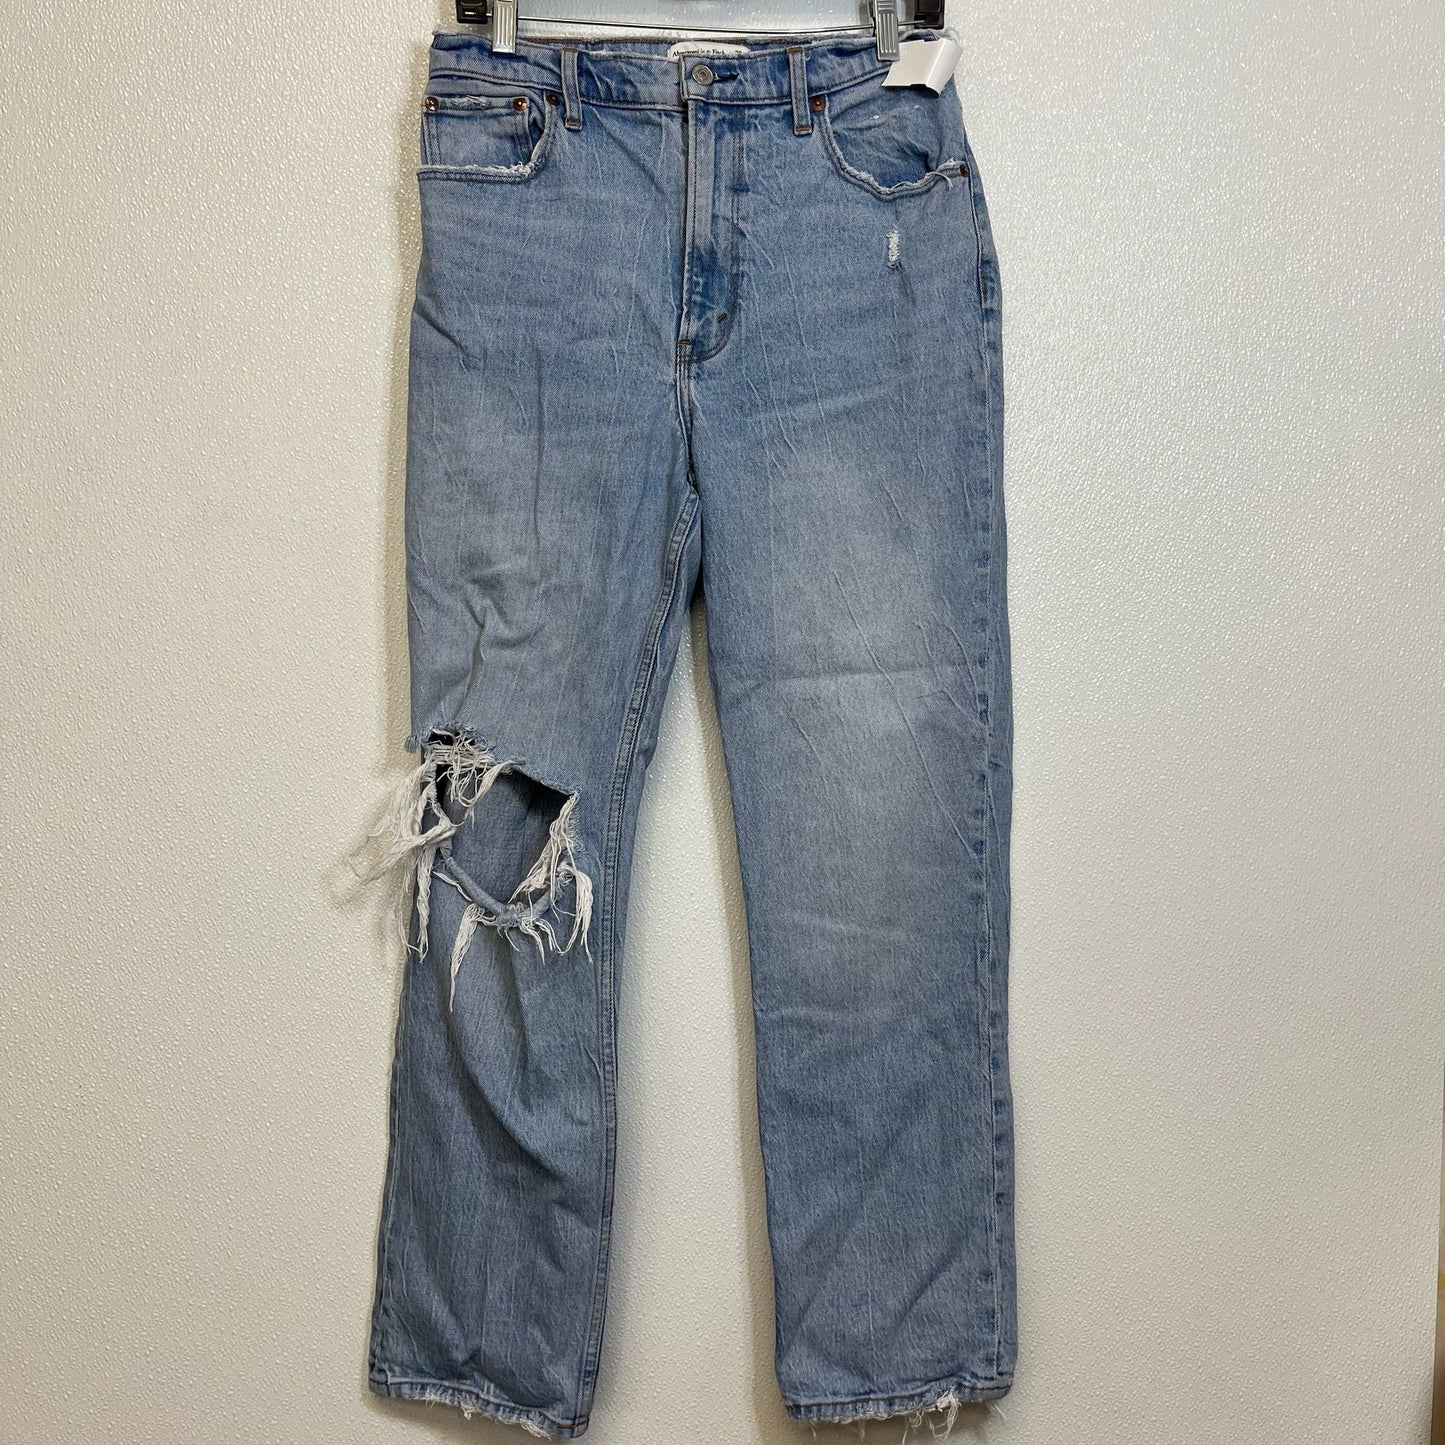 Denim Jeans Relaxed/boyfriend Abercrombie And Fitch, Size 8